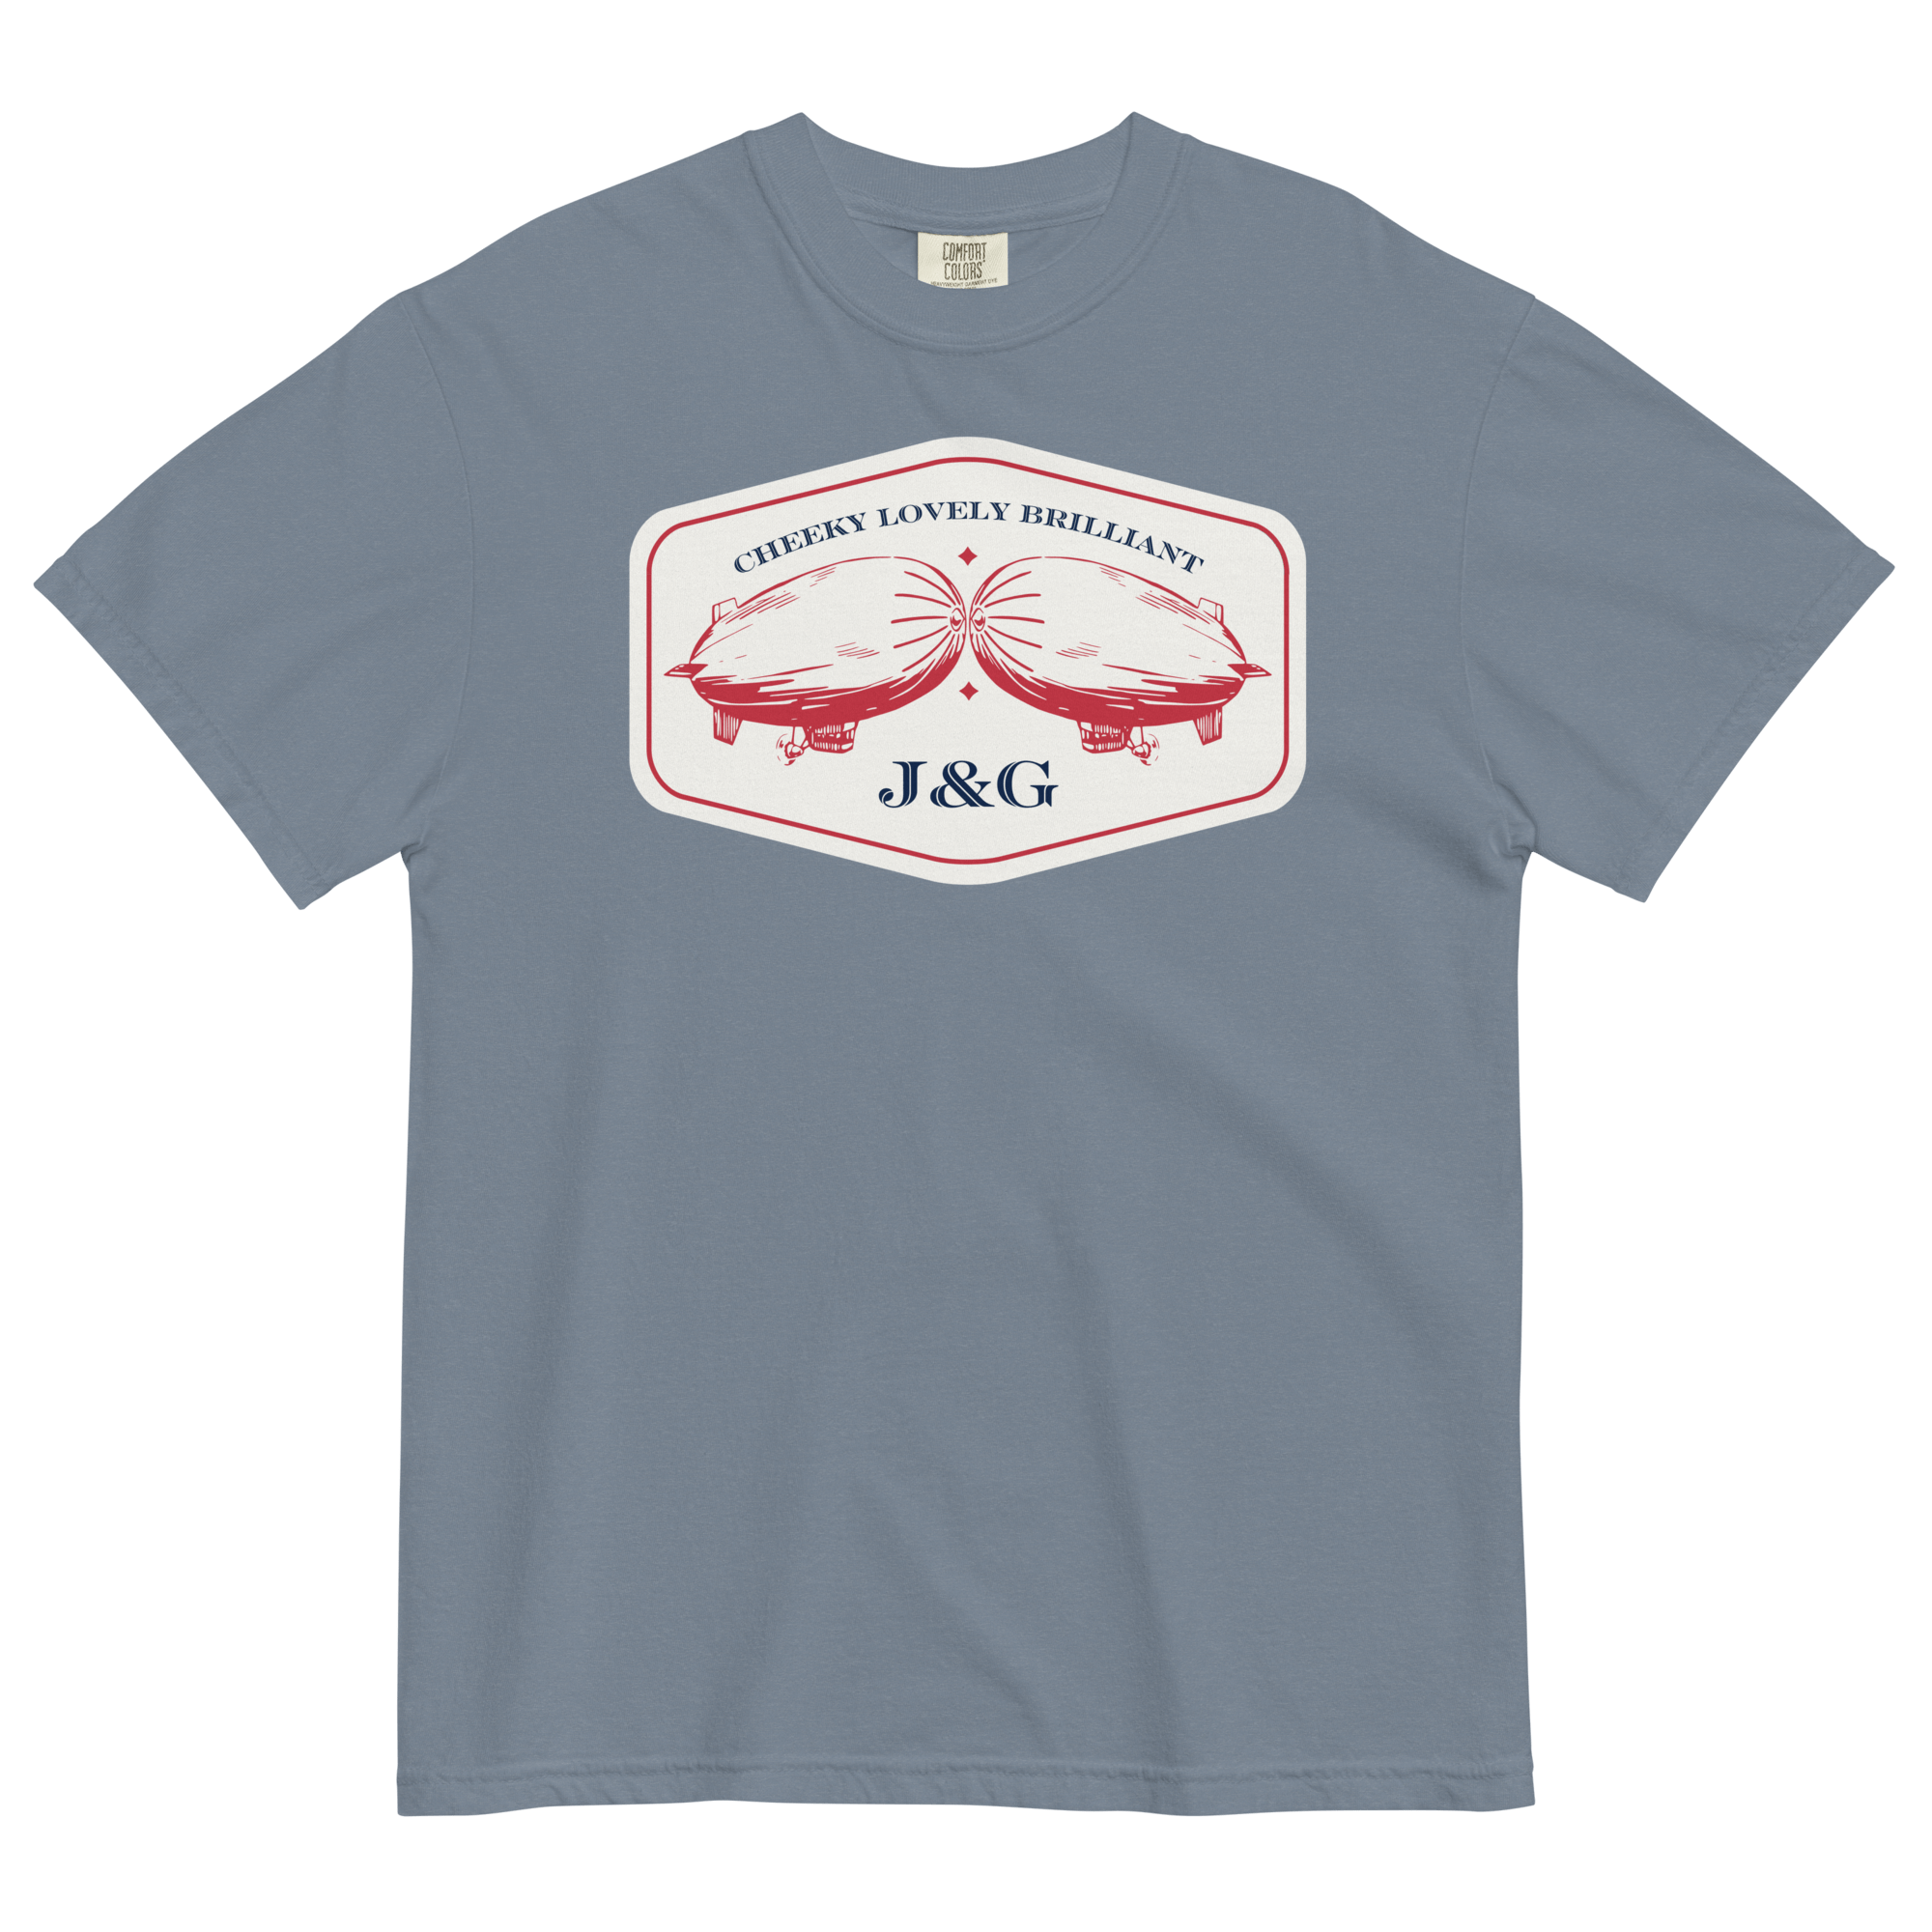 Cheeky Lovely Brilliant Airships T-shirt | Garment-Dyed Heavyweight Cotton Blue Jean / S Shirts & Tops Jolly & Goode